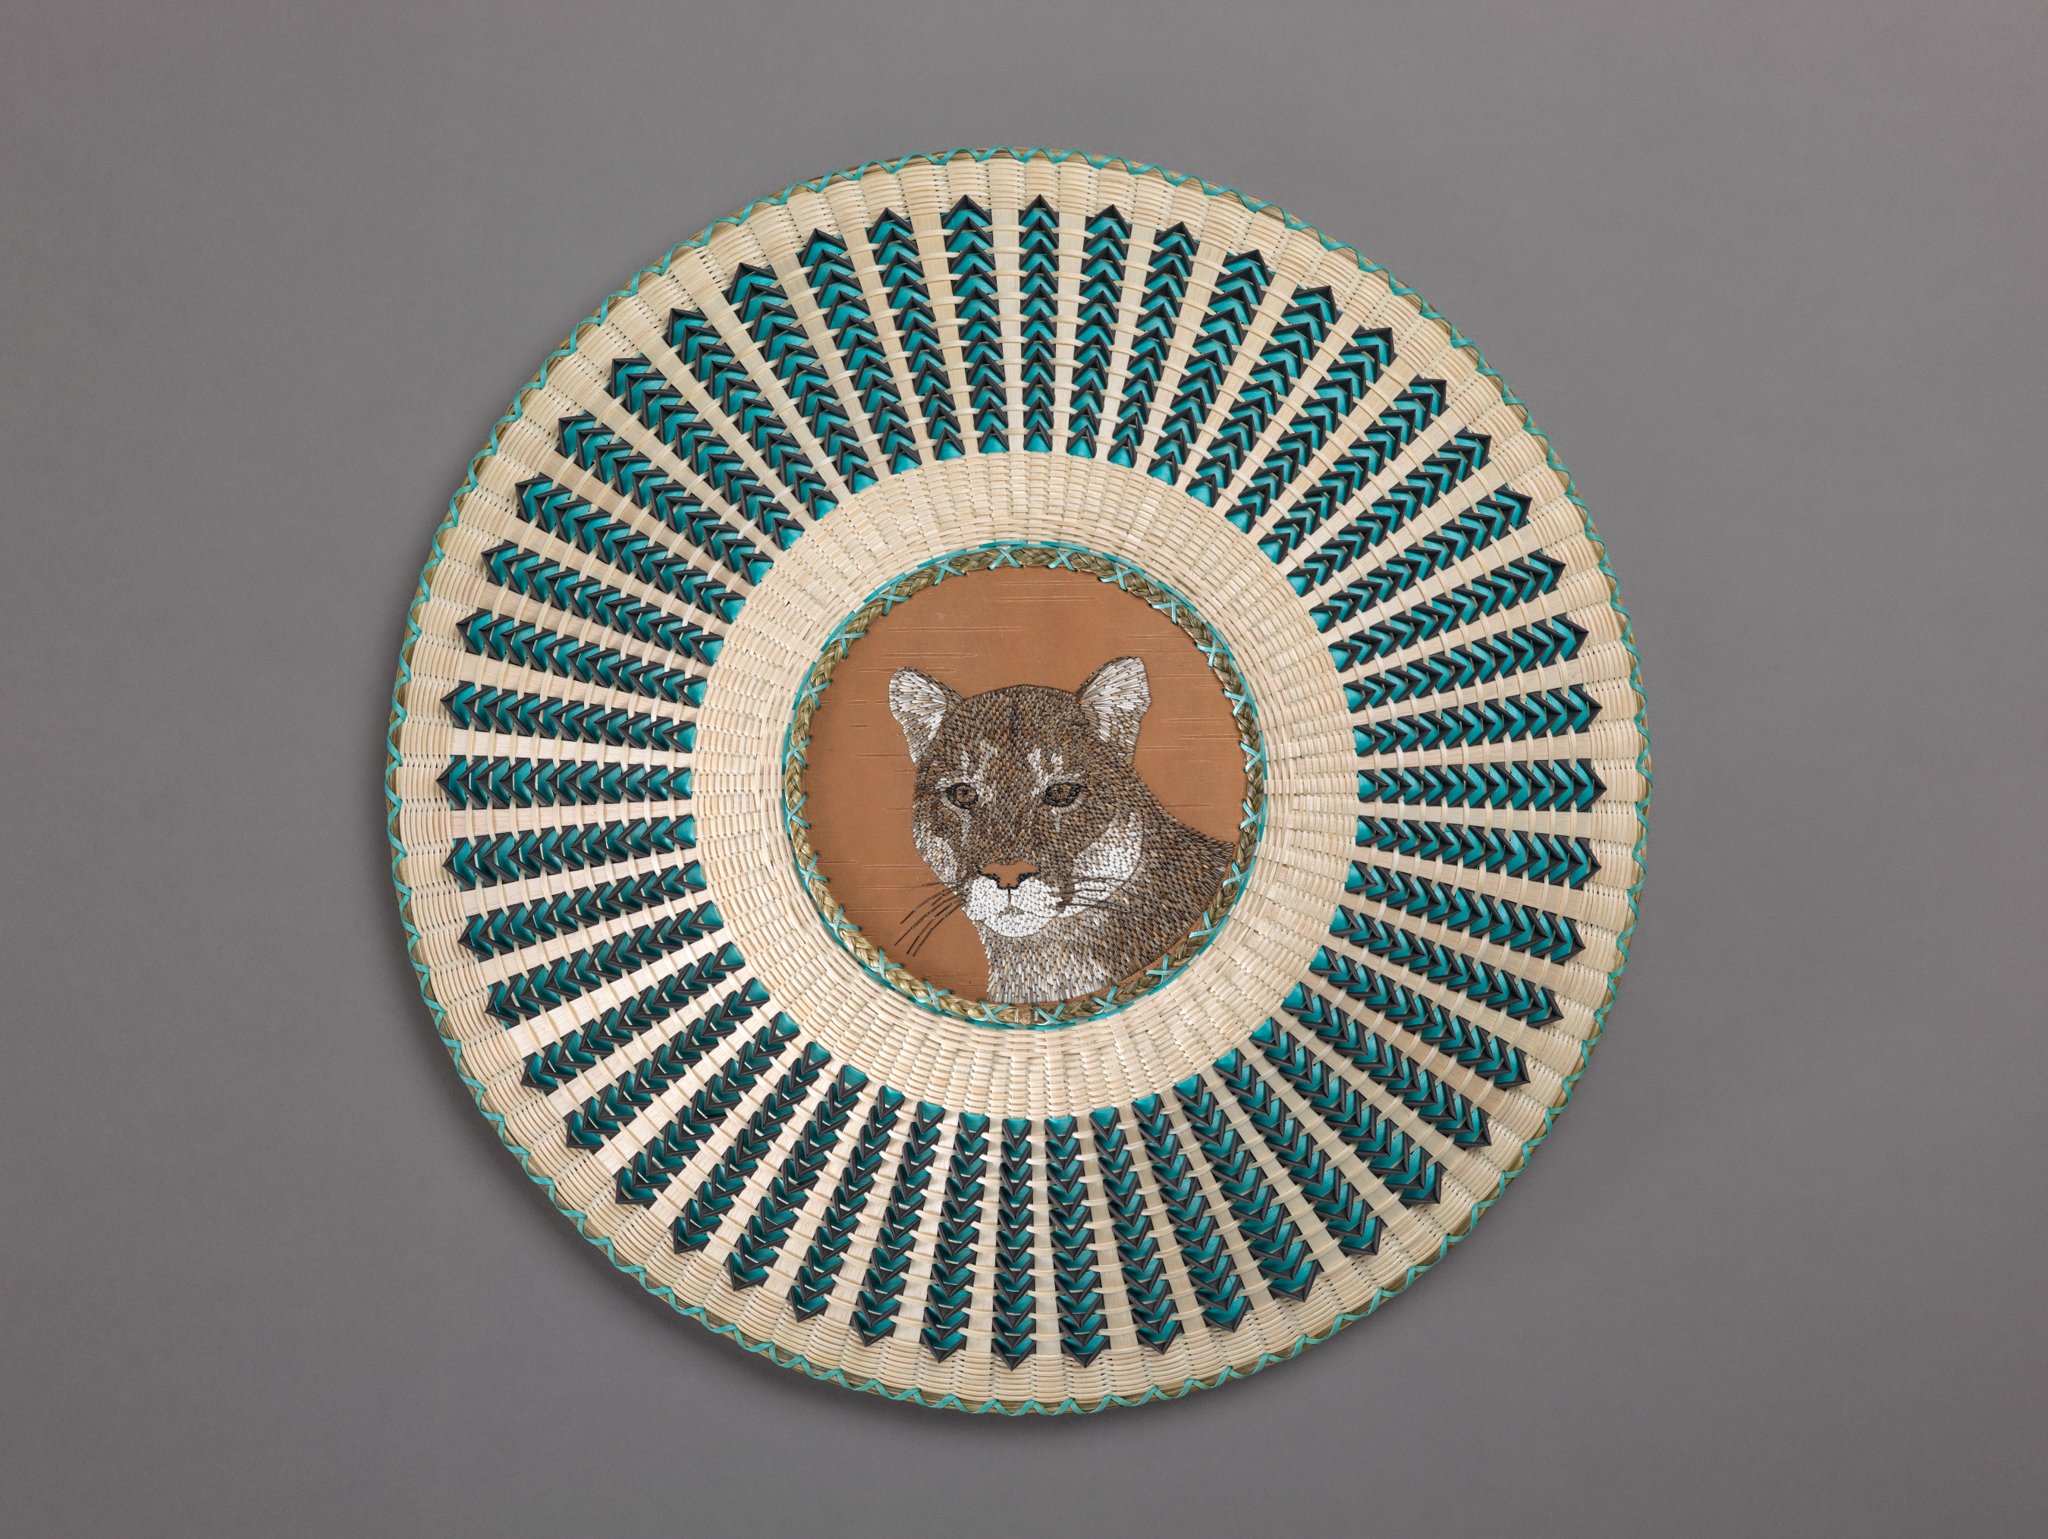  Jeremy Frey (Passamaquoddy, born 1978),  Watchful Spirit  (detail), 2022, ash, porcupine quills, sweetgrass, and dye, 27 3/8 x 22 1/4 x 22 1/4 inches. Denver Art Museum: Purchased with the Nancy Blomberg Acquisitions Fund for Native American Art, 20